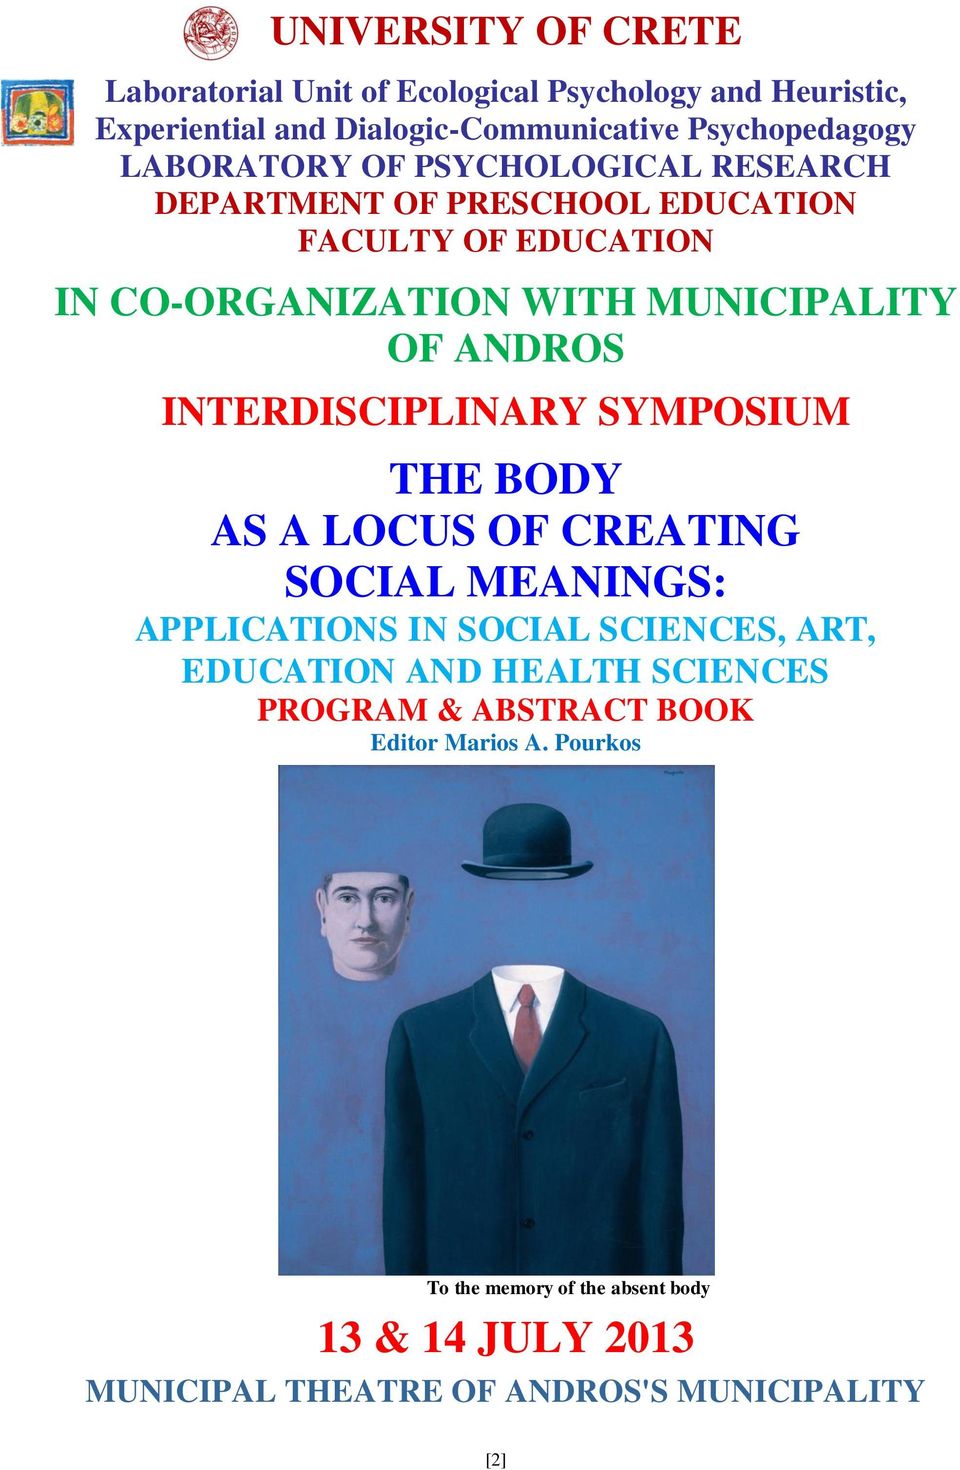 INTERDISCIPLINARY SYMPOSIUM THE BODY AS A LOCUS OF CREATING SOCIAL MEANINGS: APPLICATIONS IN SOCIAL SCIENCES, ART, EDUCATION AND HEALTH